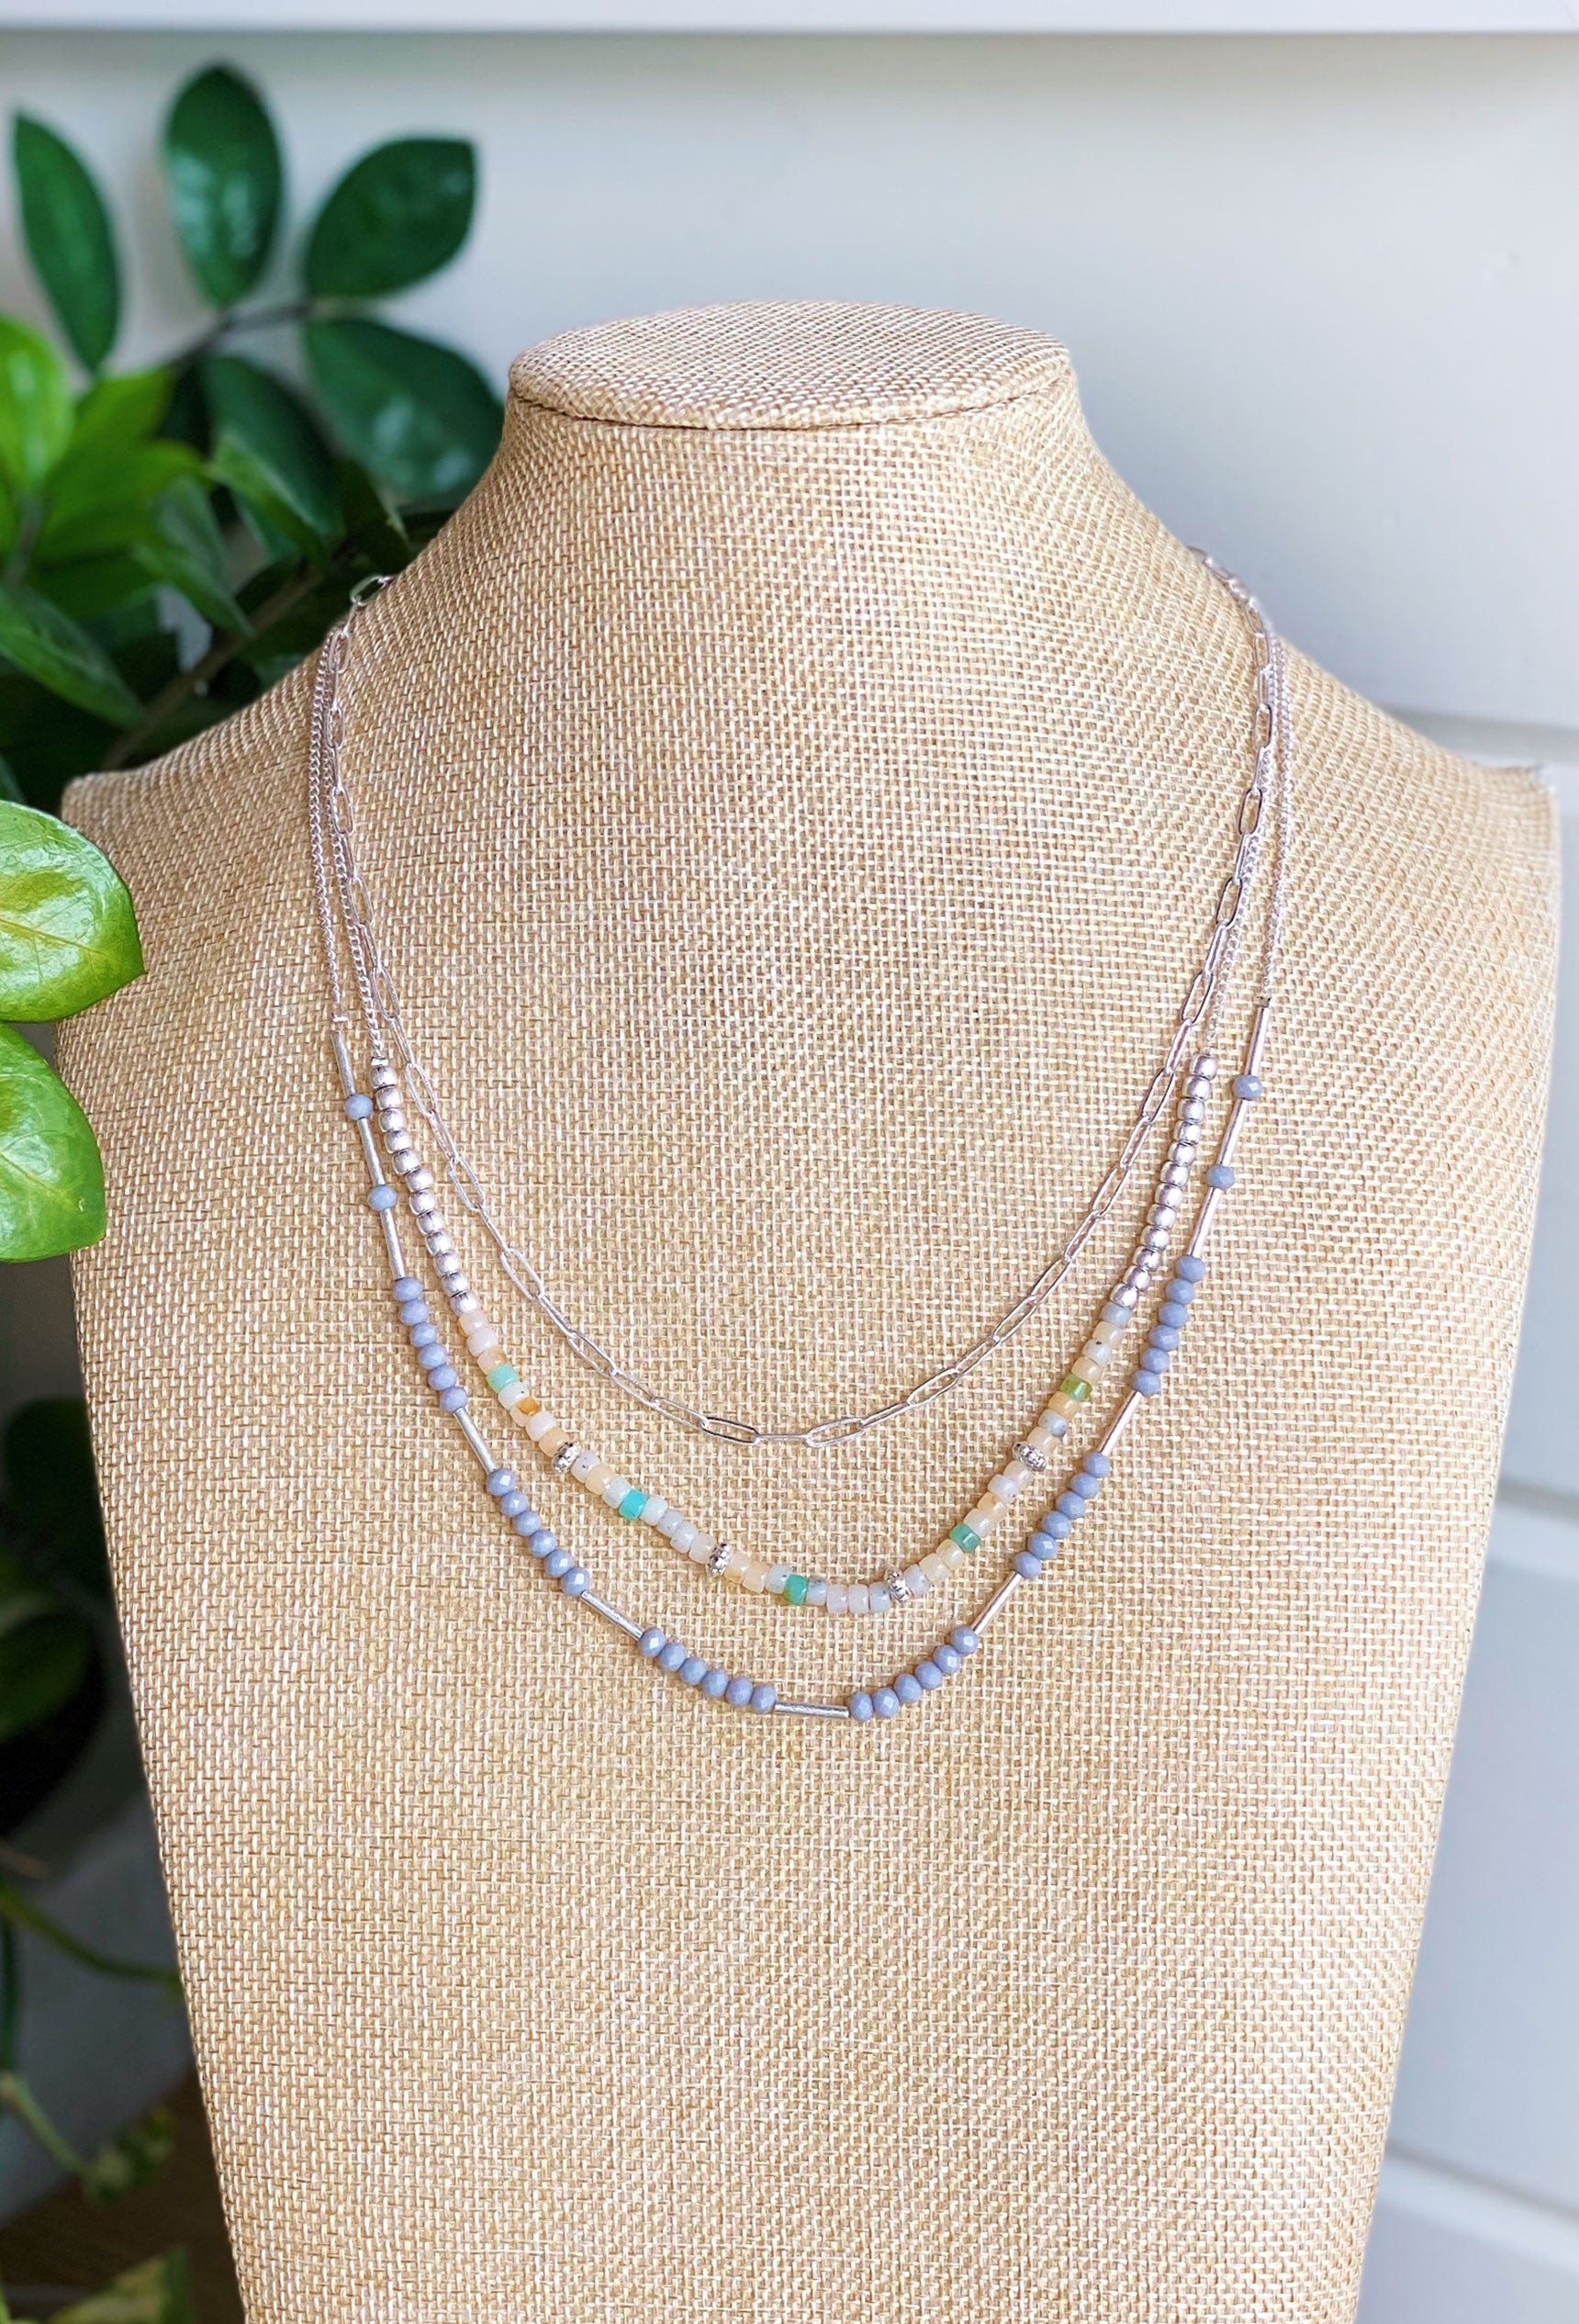 Summer Glow Layered Necklace, Dainty silver paperclip necklace layered with colorful beads suspended along a dainty silver chain